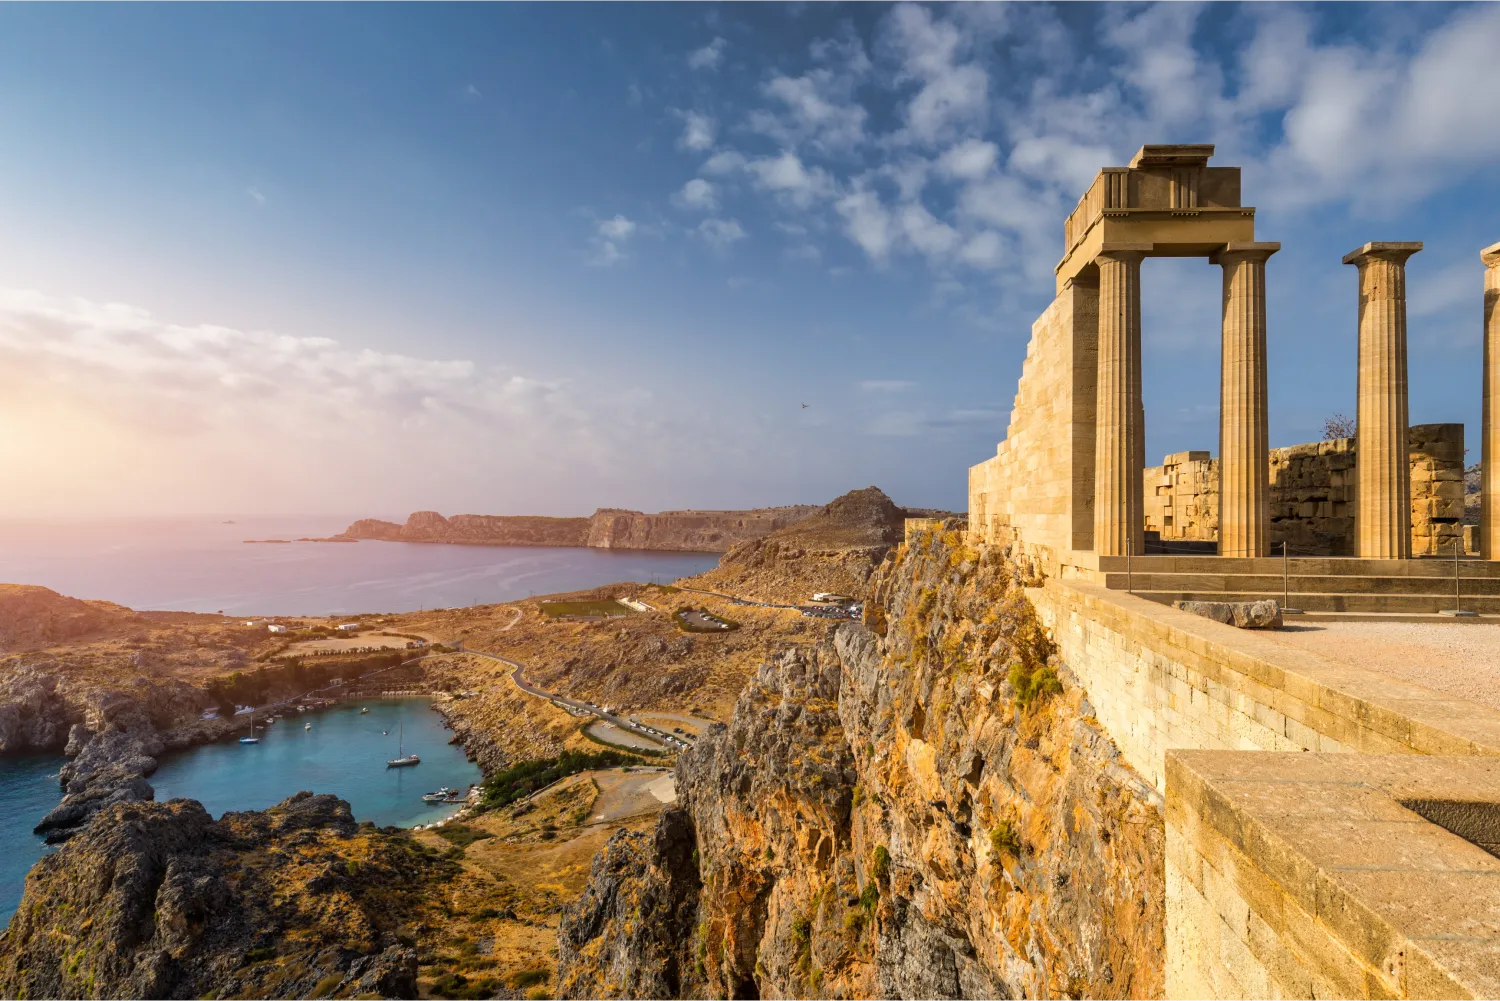 The Ruins Of Acropolis Of Lindos in Rhodes